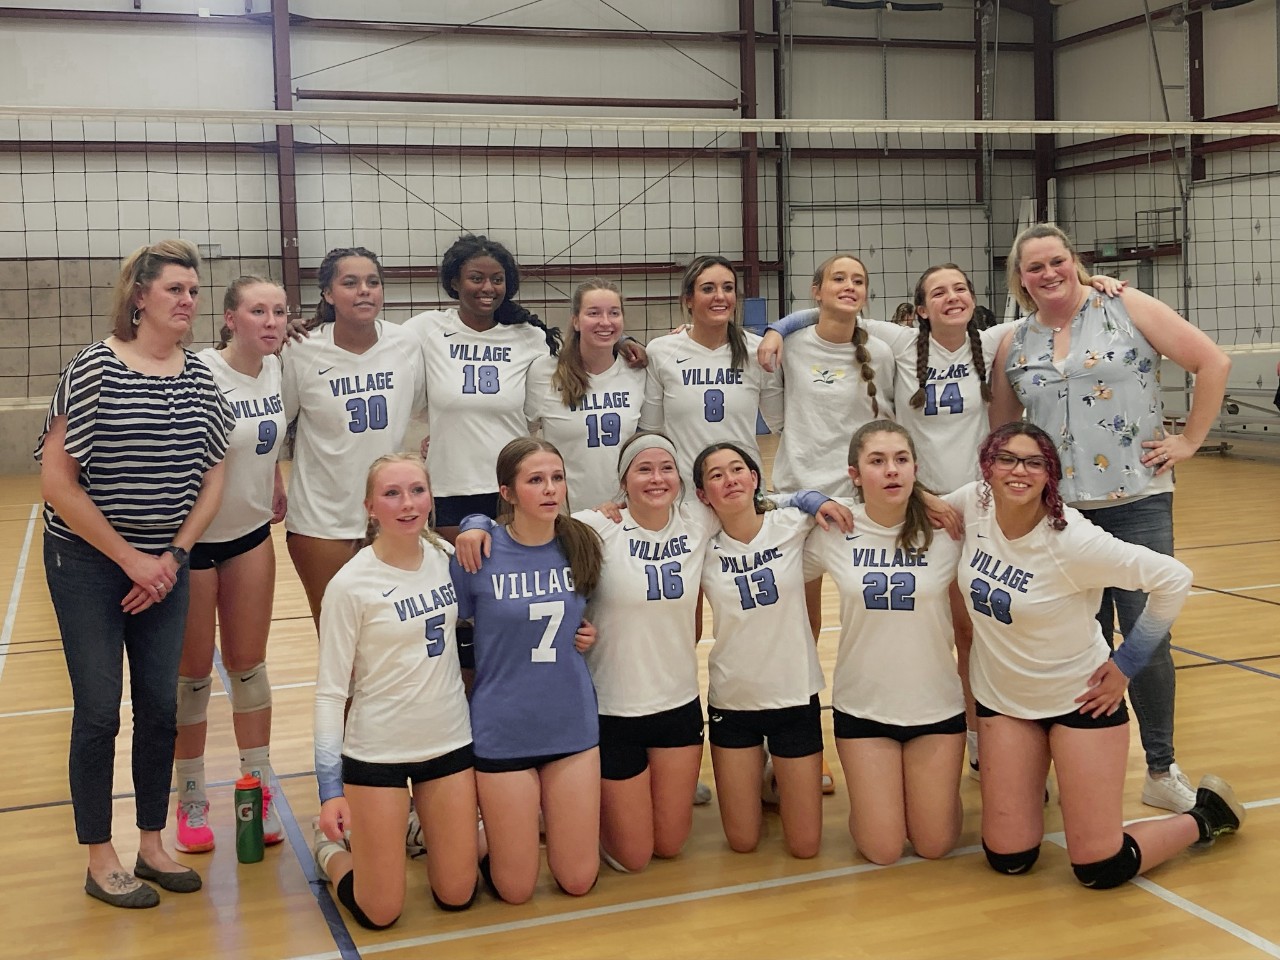 A group photo of the Village Girls Volleyball Team